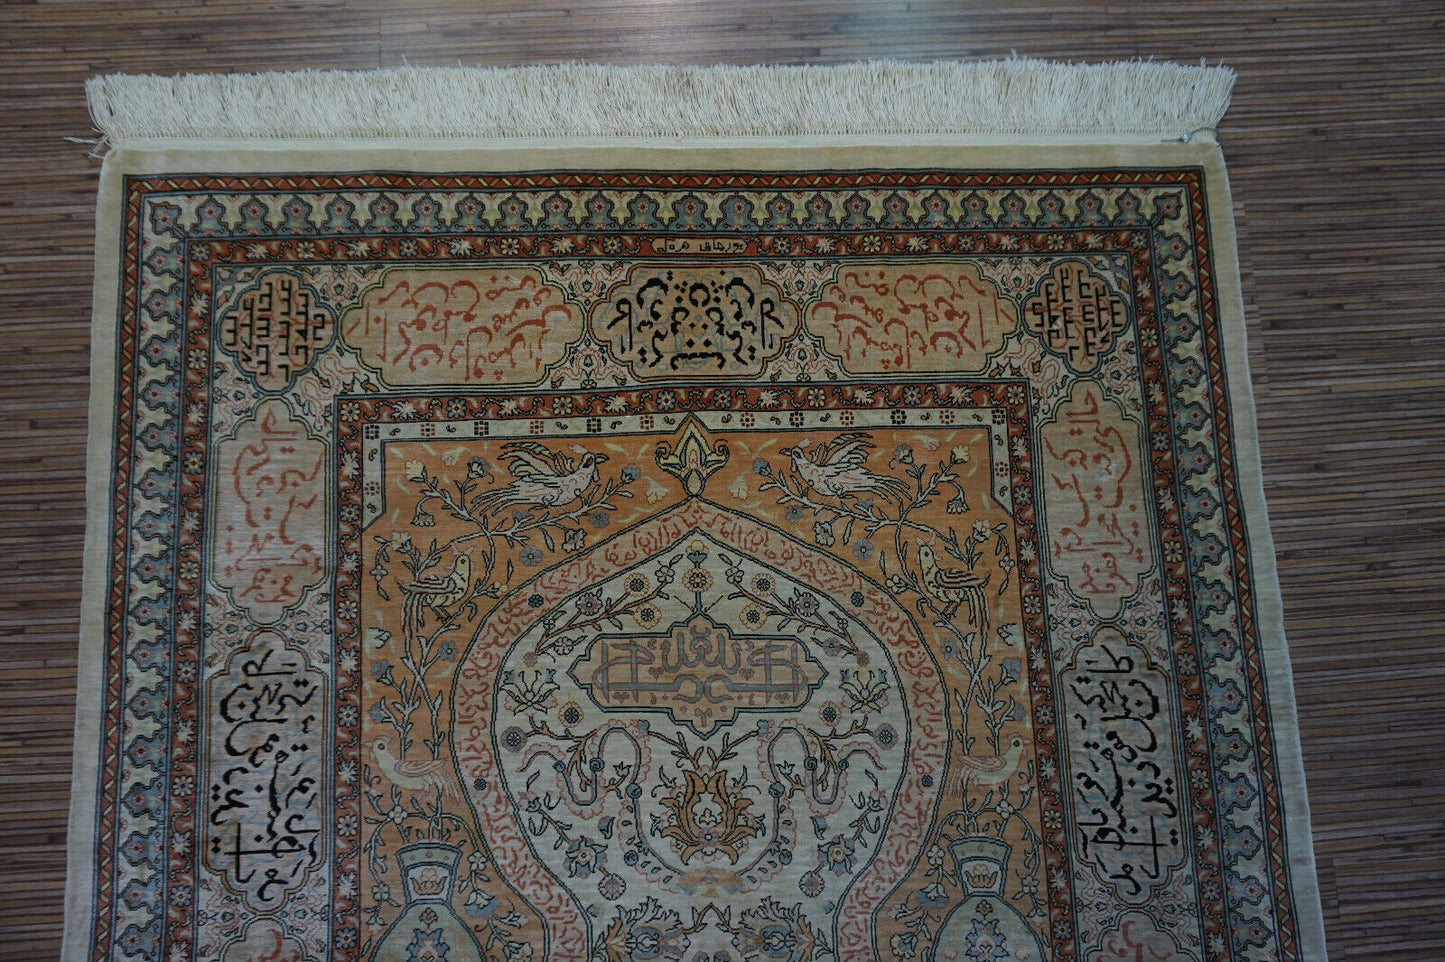 Close-up of the central field with lighter colors on the Handmade Vintage Turkish Hereke Silk Rug